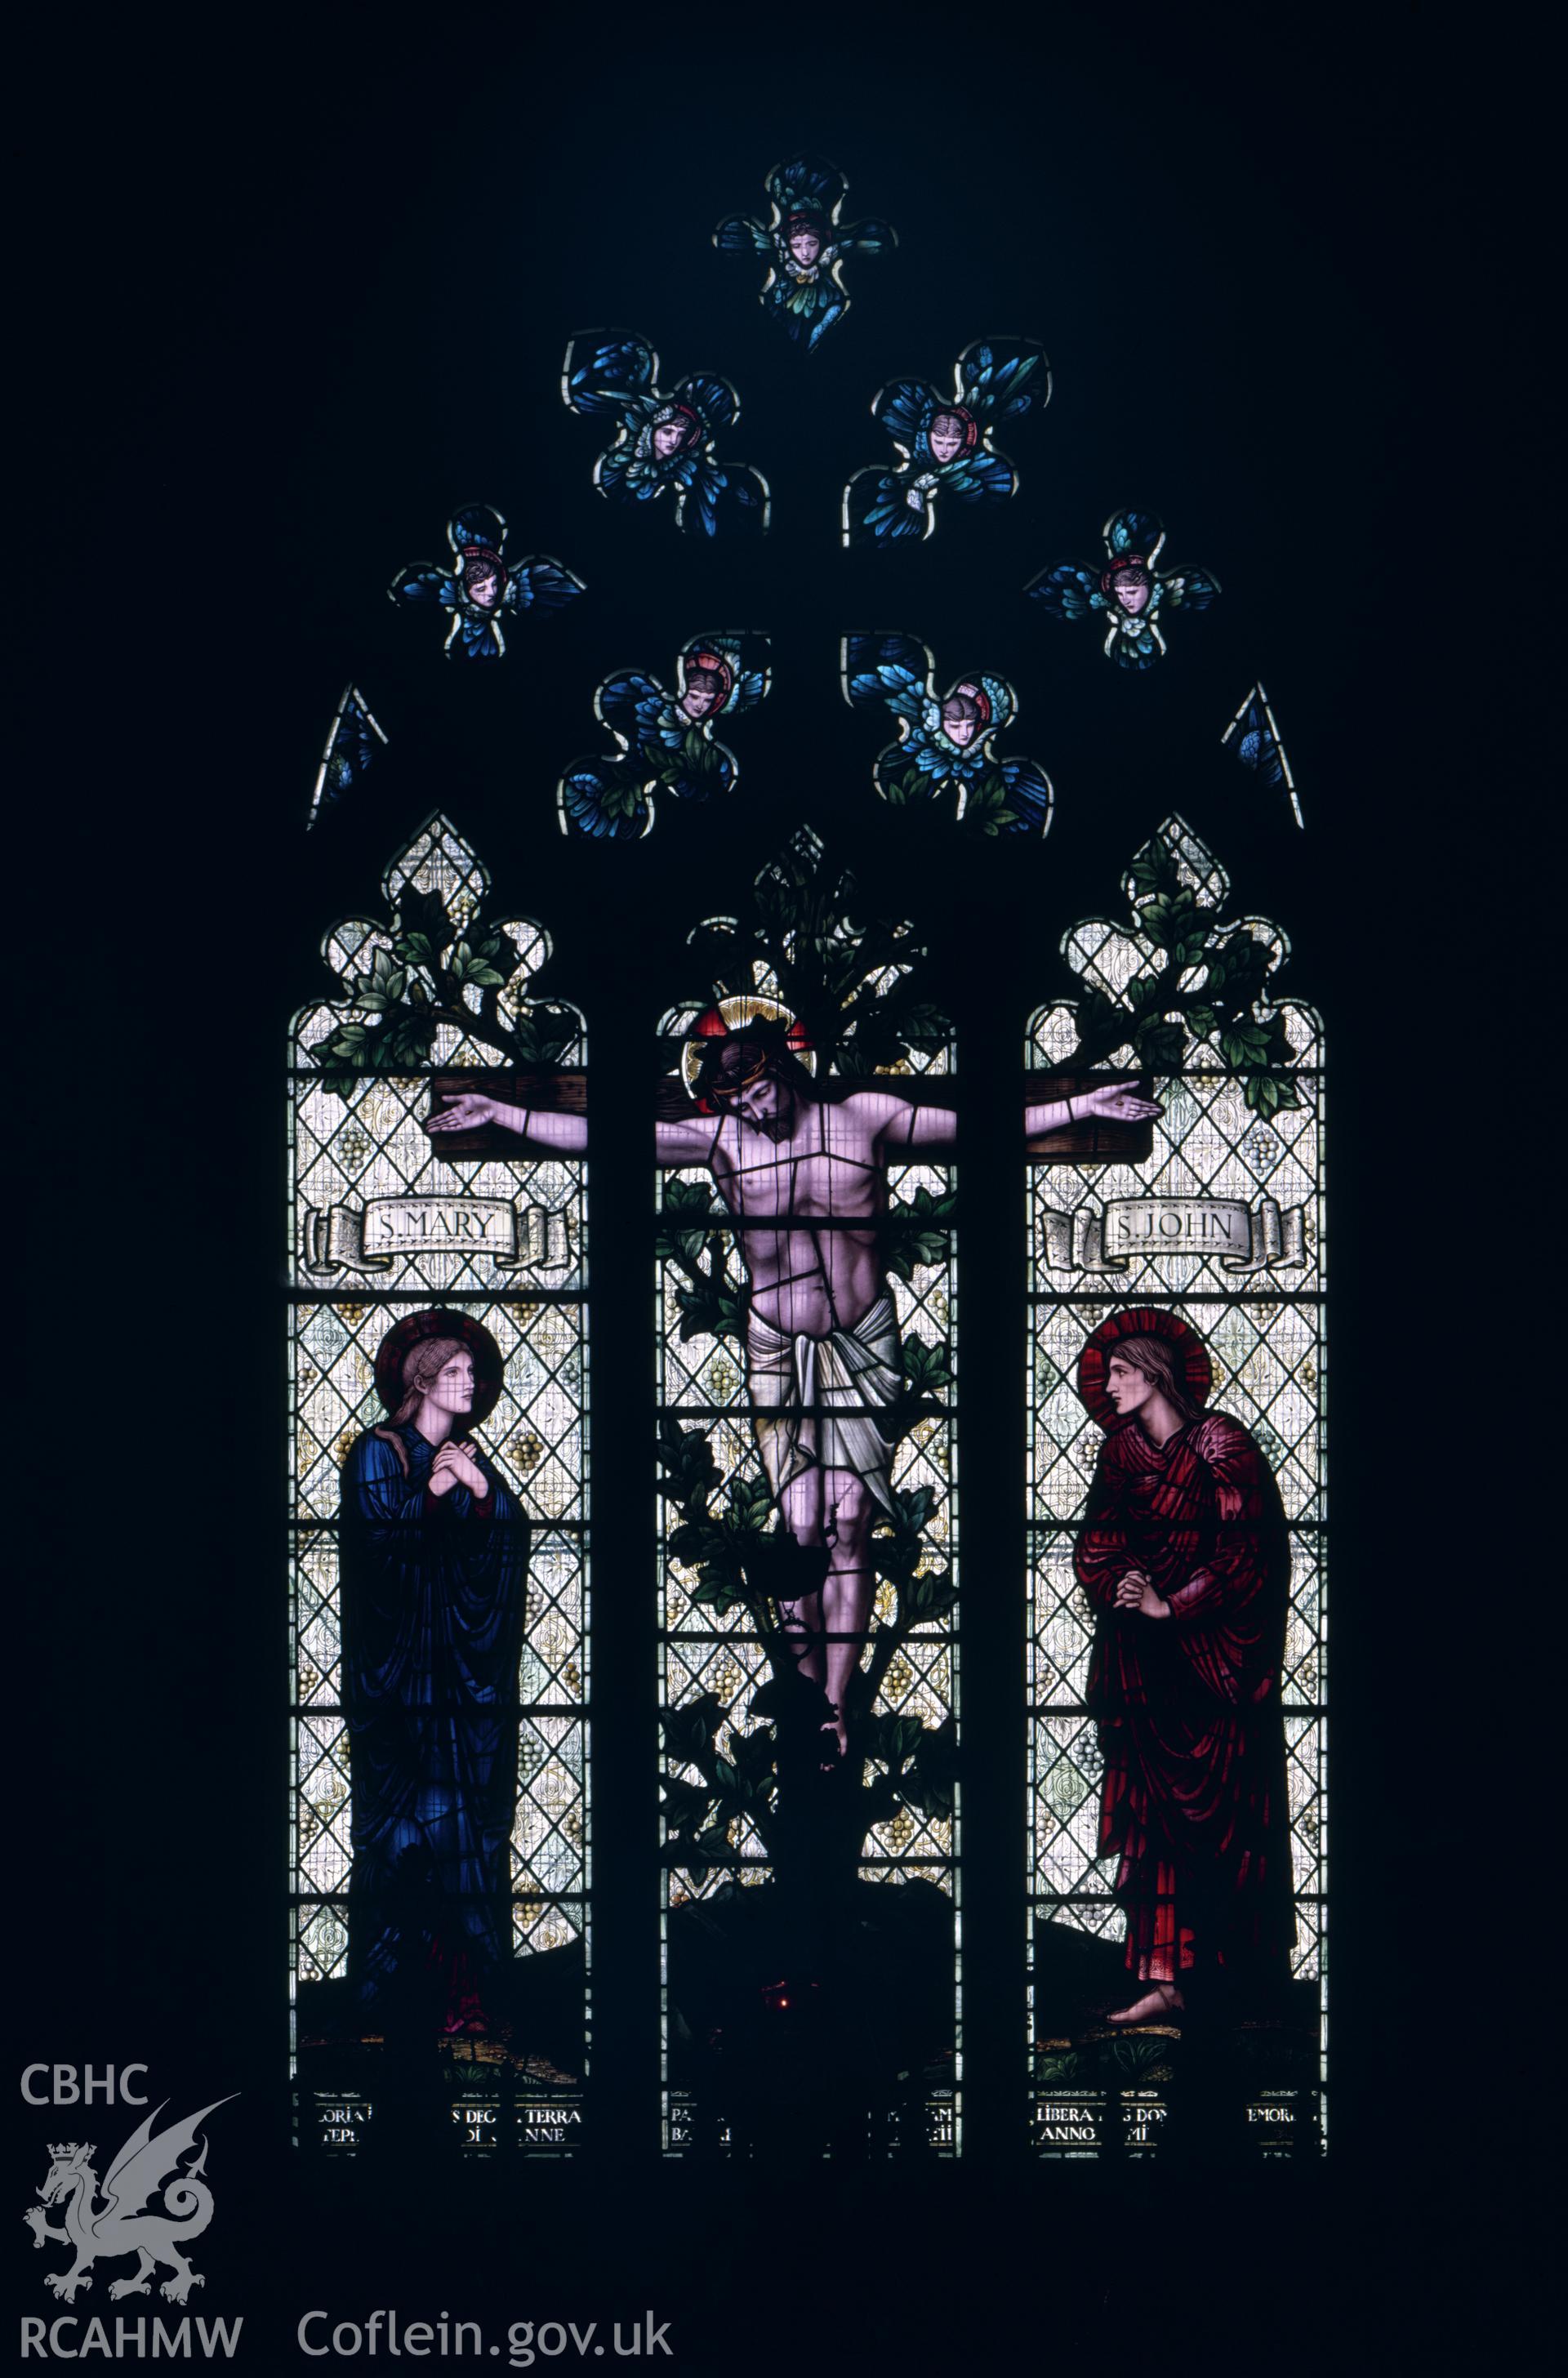 RCAHMW colour transparency of an interior view of a stained glass window depicting the nativity, designed by Edward Burne-Jones, at Hawarden Church.